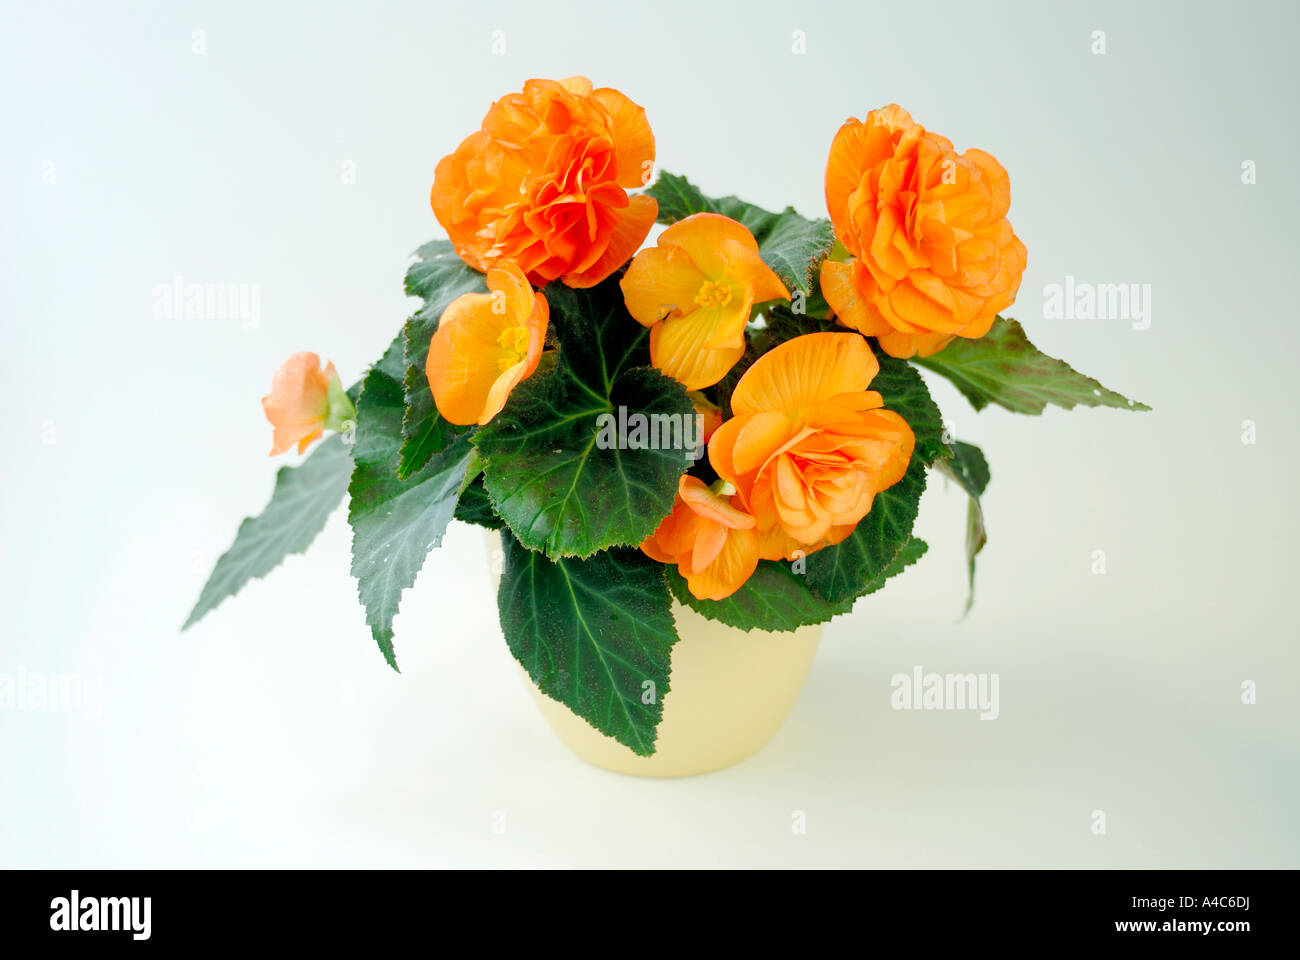 Begonia (Begonia spec), flowering potted plant, studio picture Stock Photo